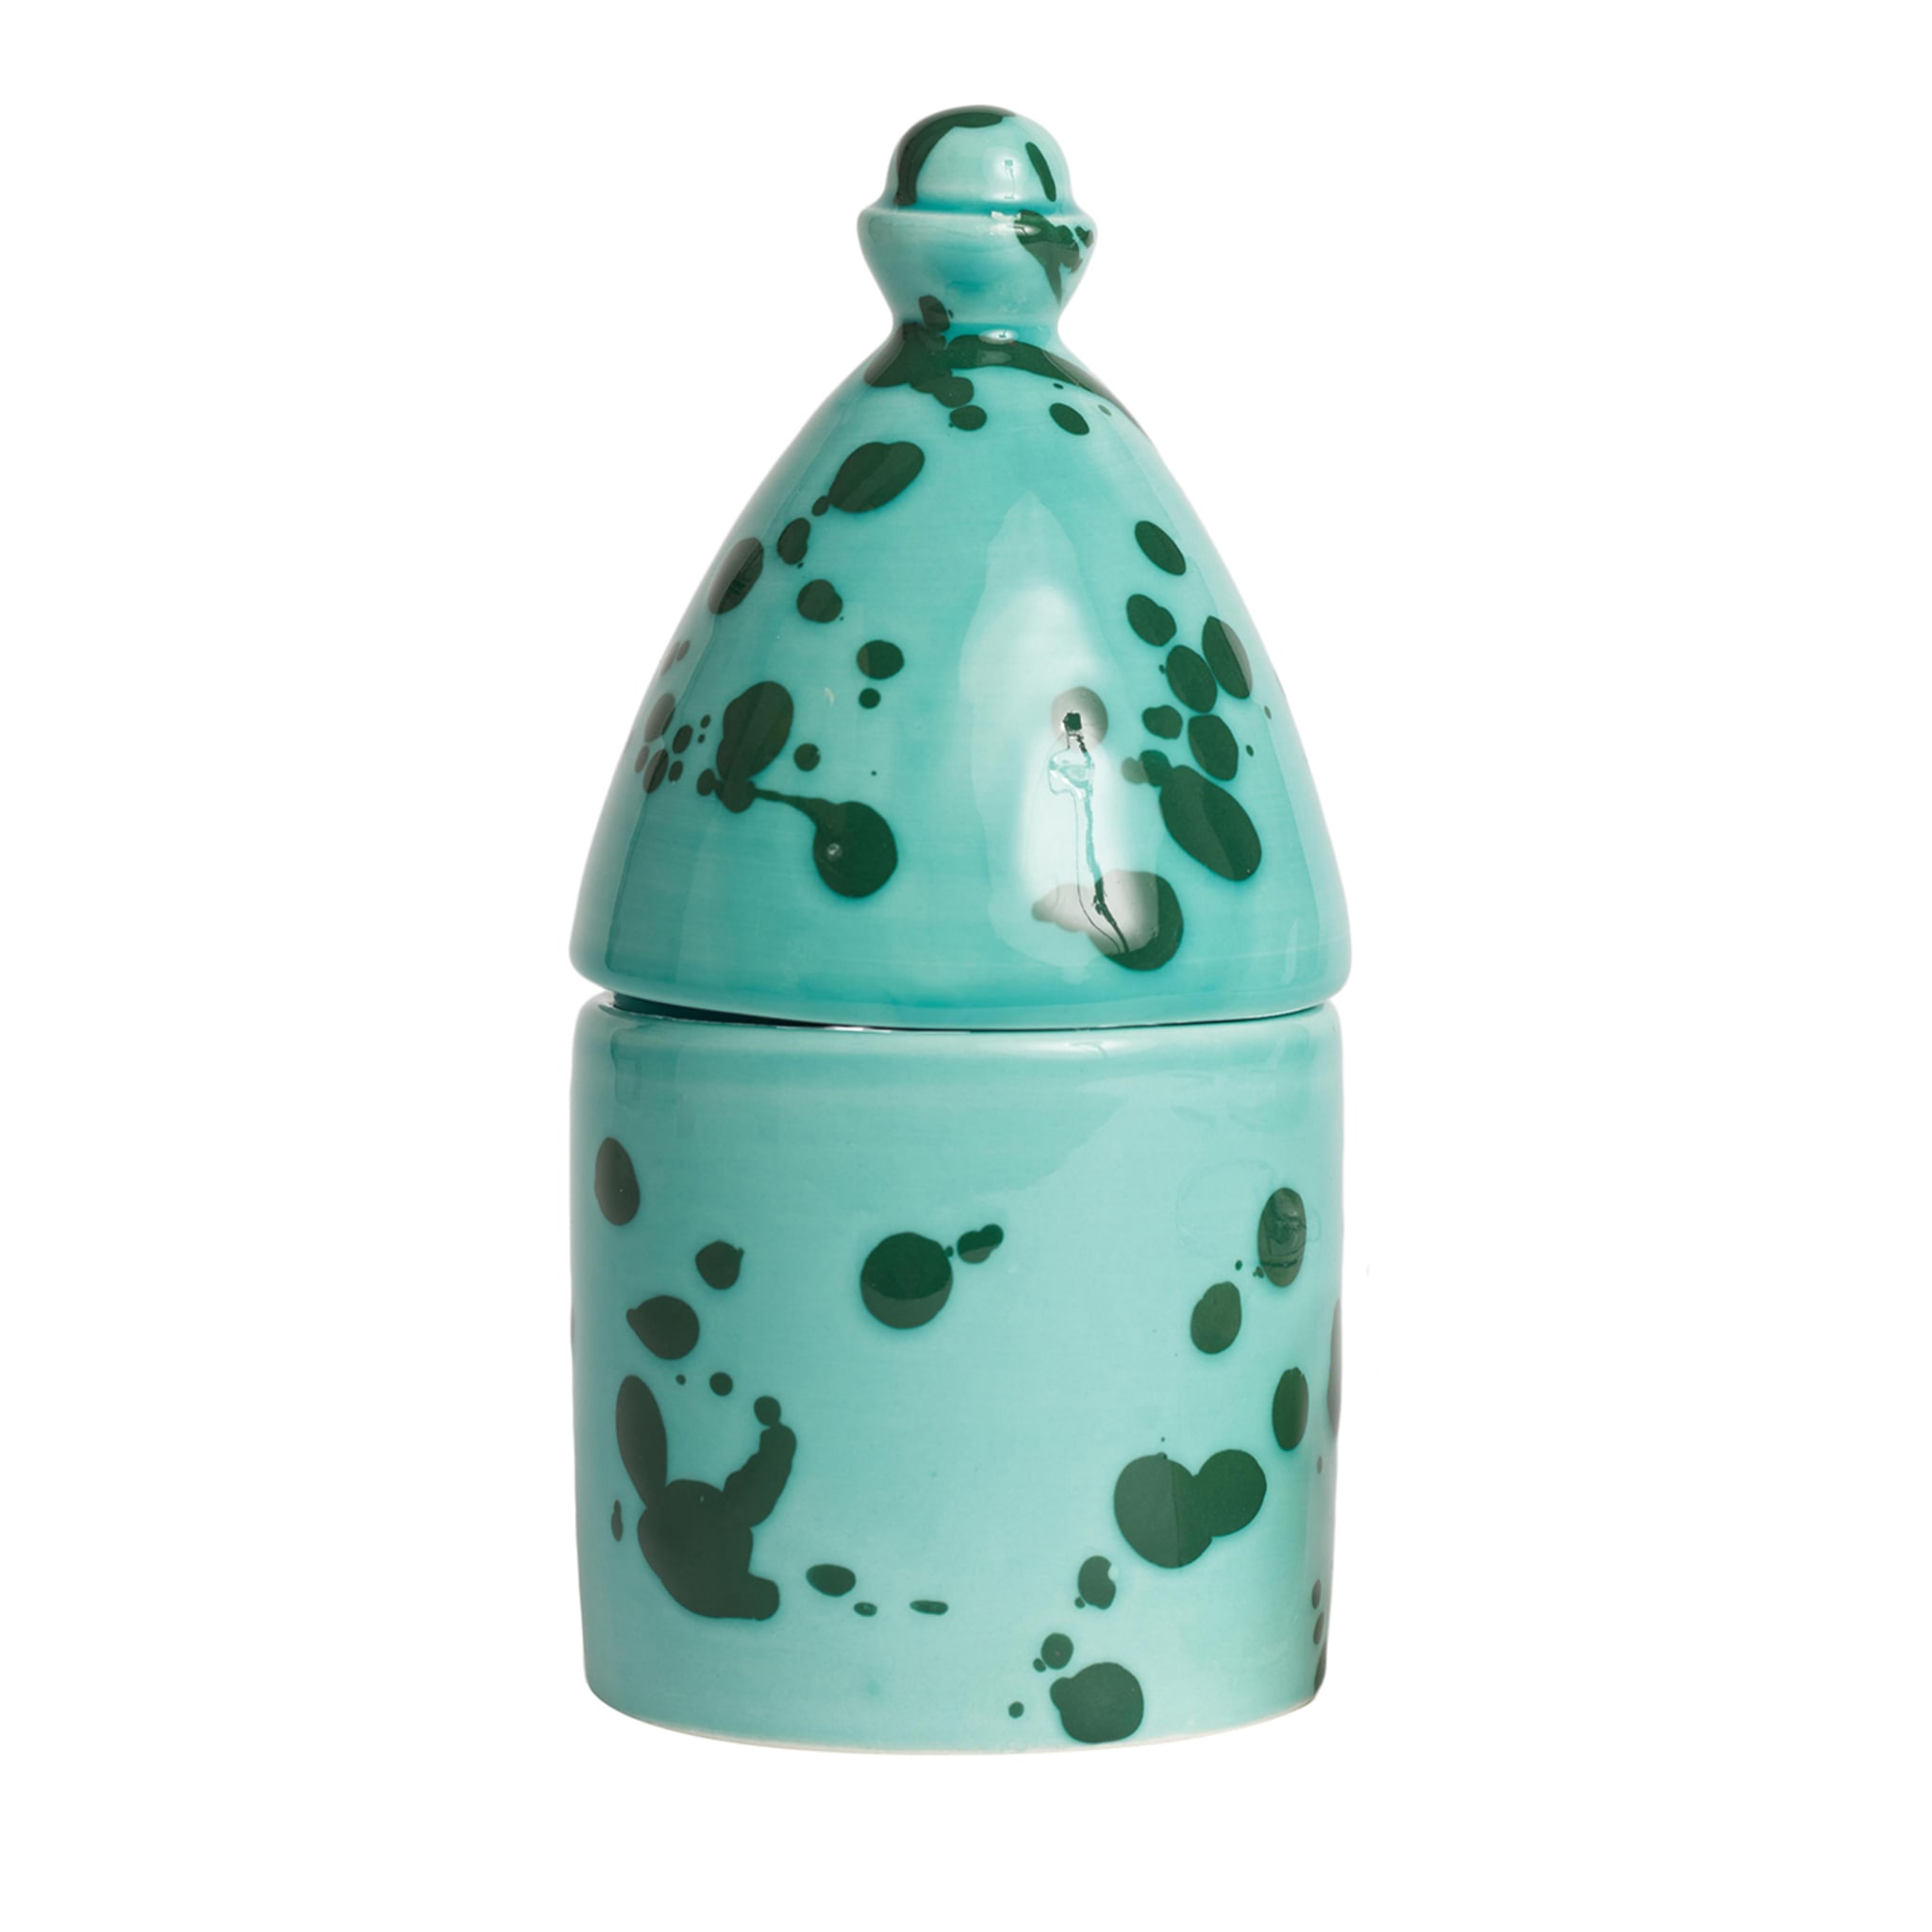 Trullo Aquamarine and Green Candle Holder - Alternative view 1